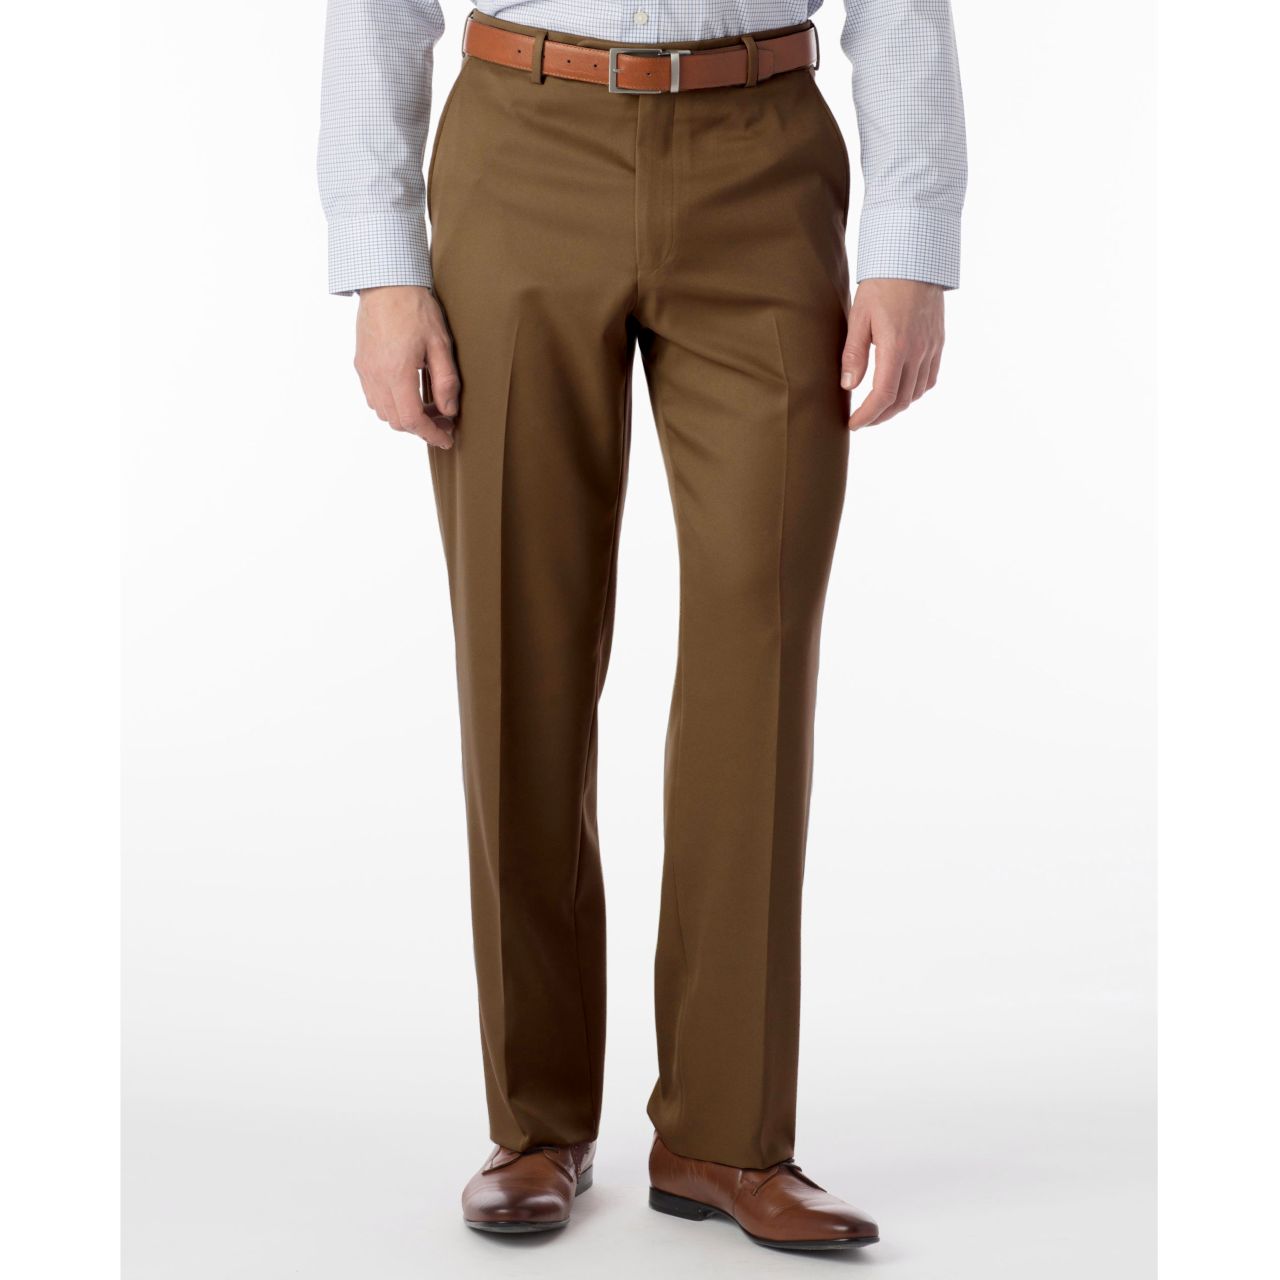 X-Treme Comfort Sateen Pants in Bourbon, Size 42 (Mansfield Relaxed Fit) by Ballin